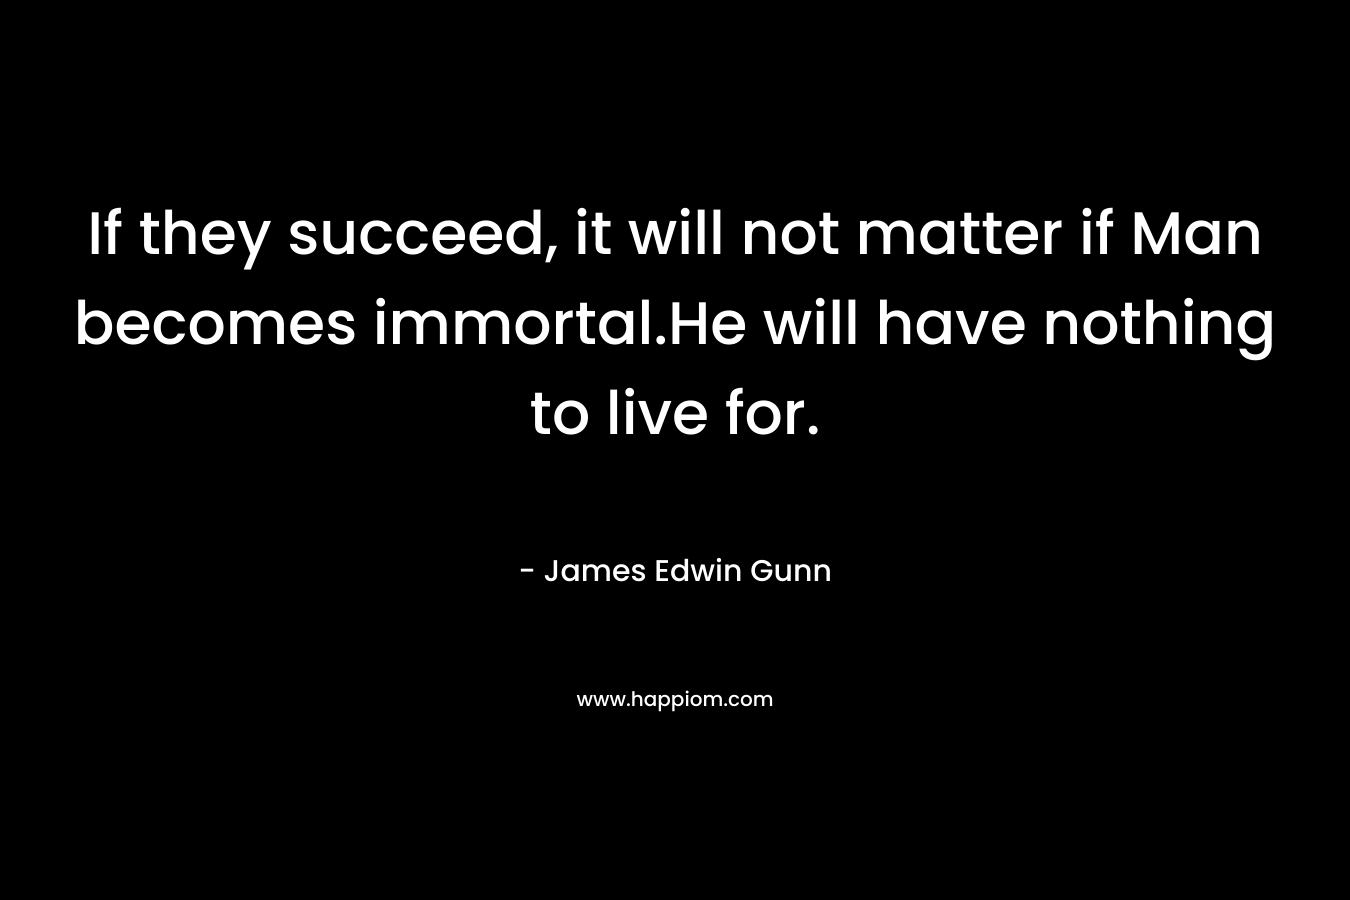 If they succeed, it will not matter if Man becomes immortal.He will have nothing to live for. – James Edwin Gunn